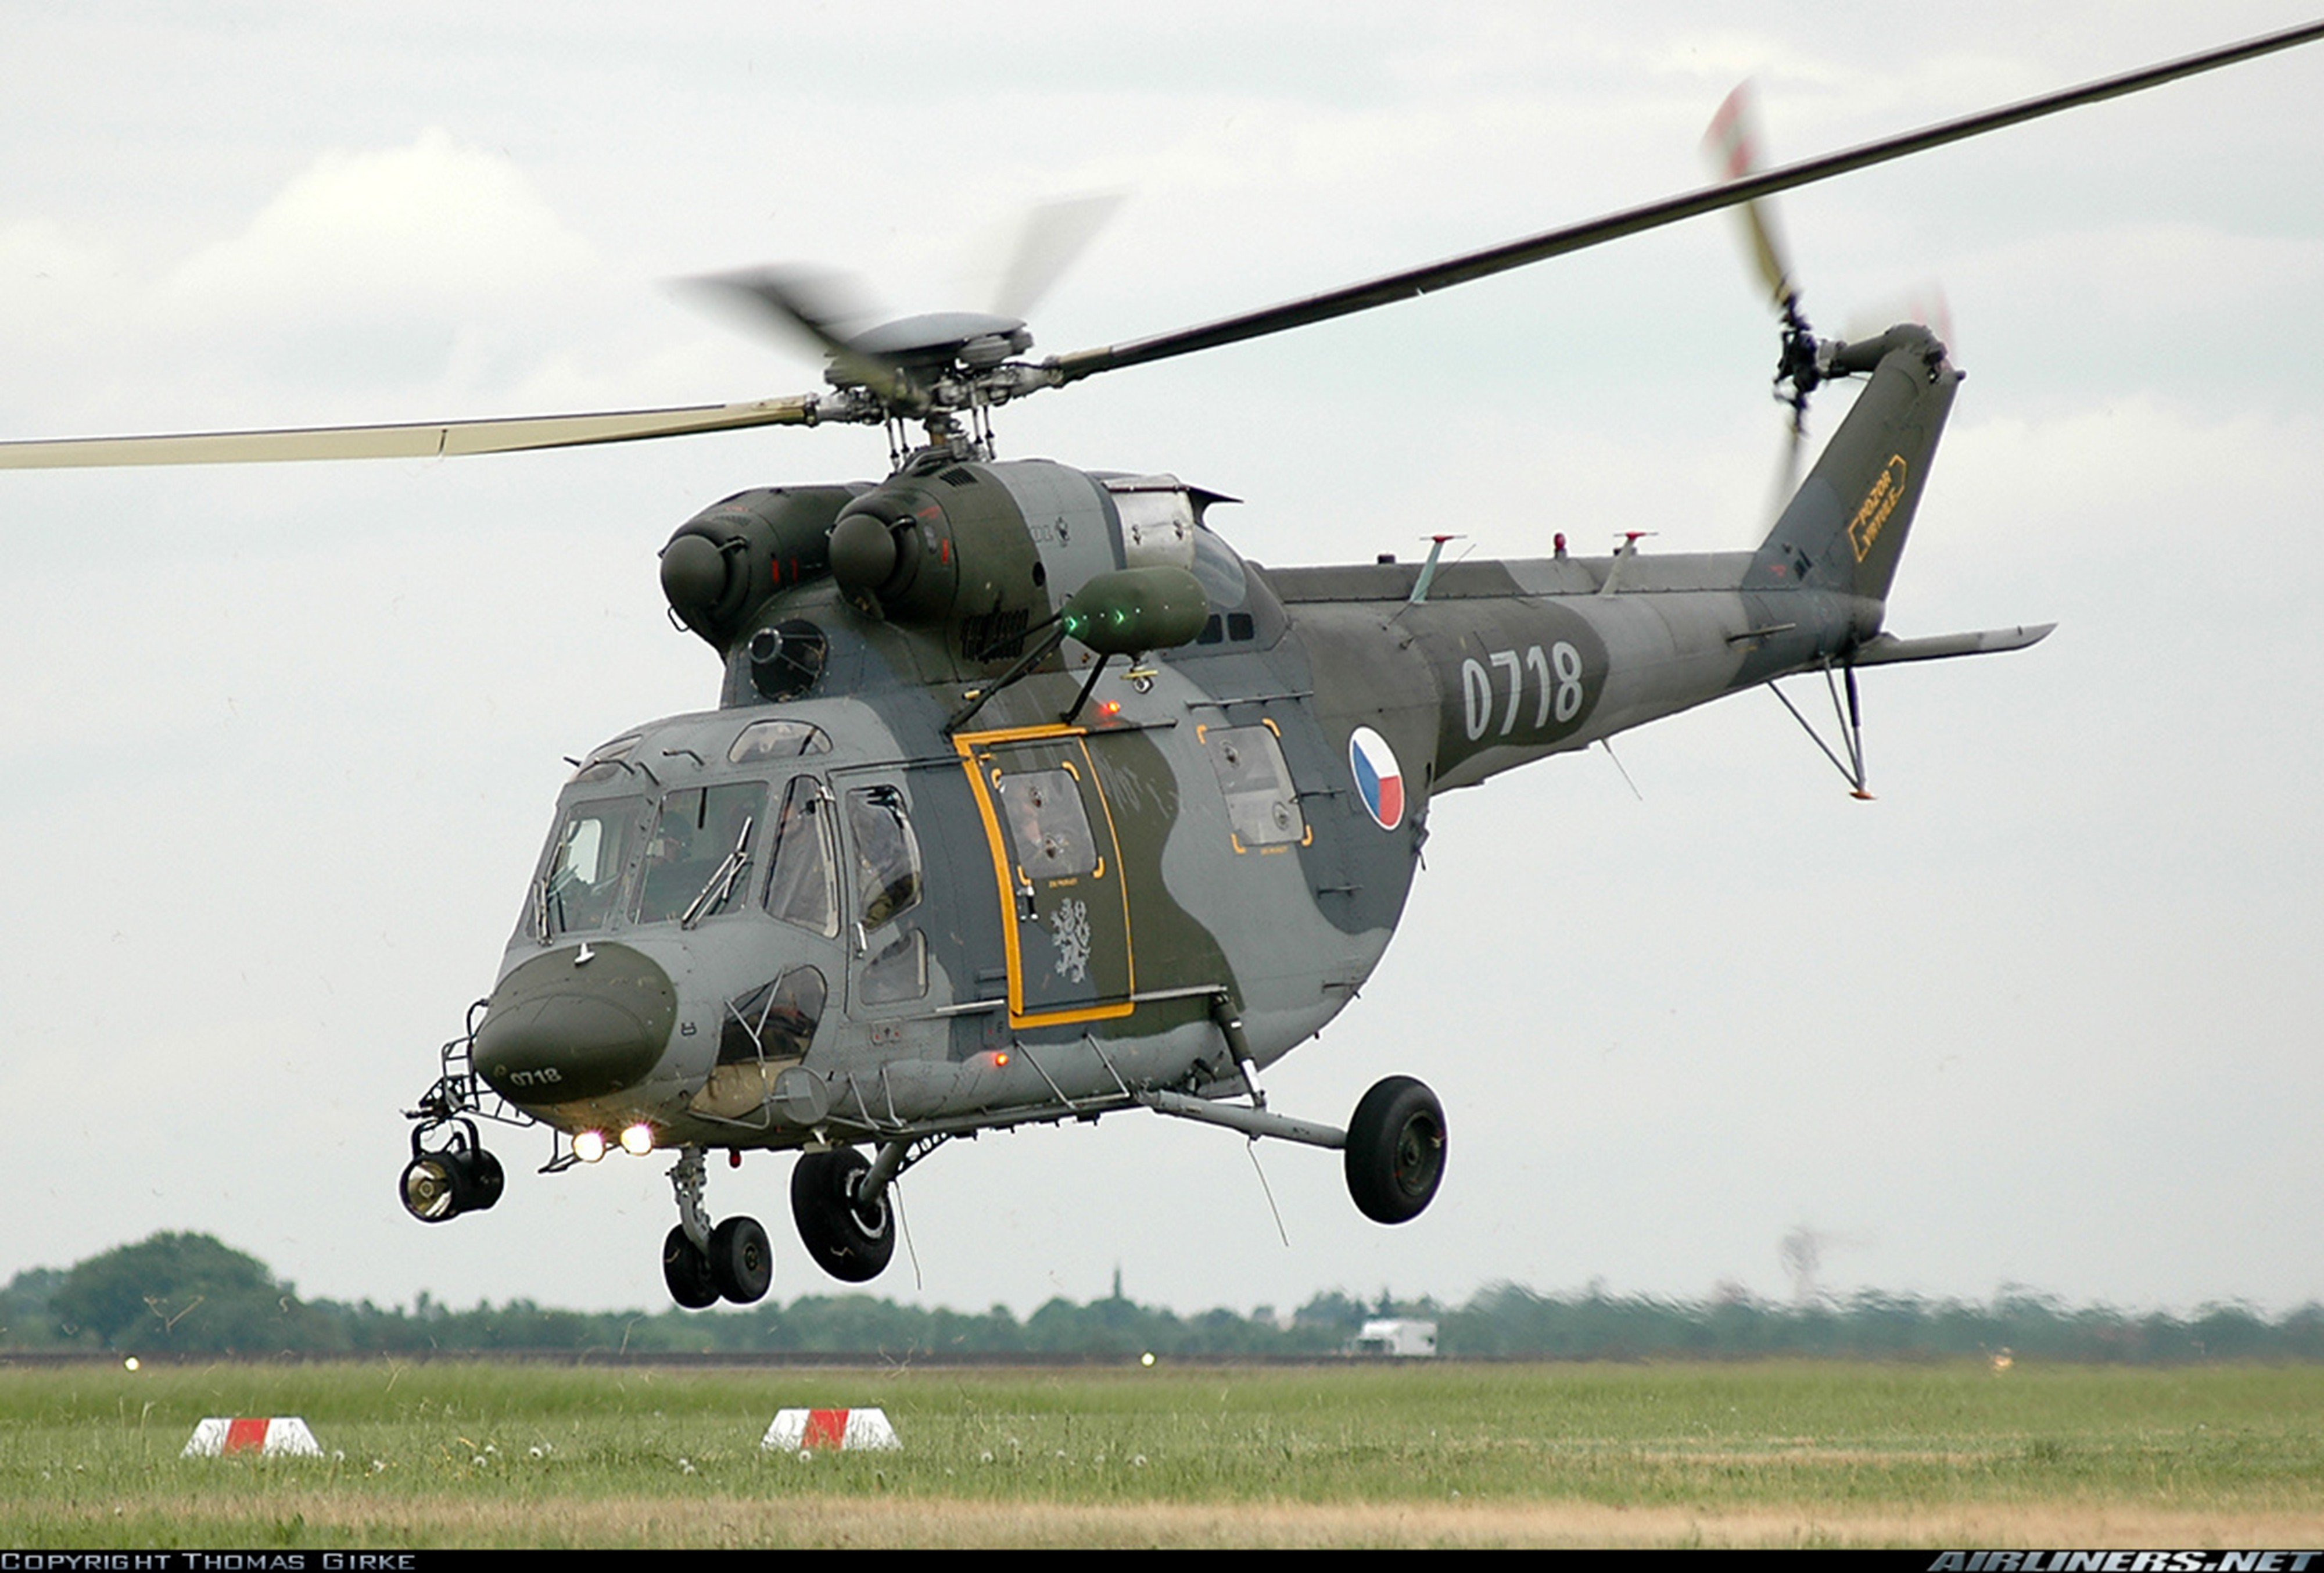 helicopter, Aircraft, Military, Army, Transport, Czech republic Wallpaper